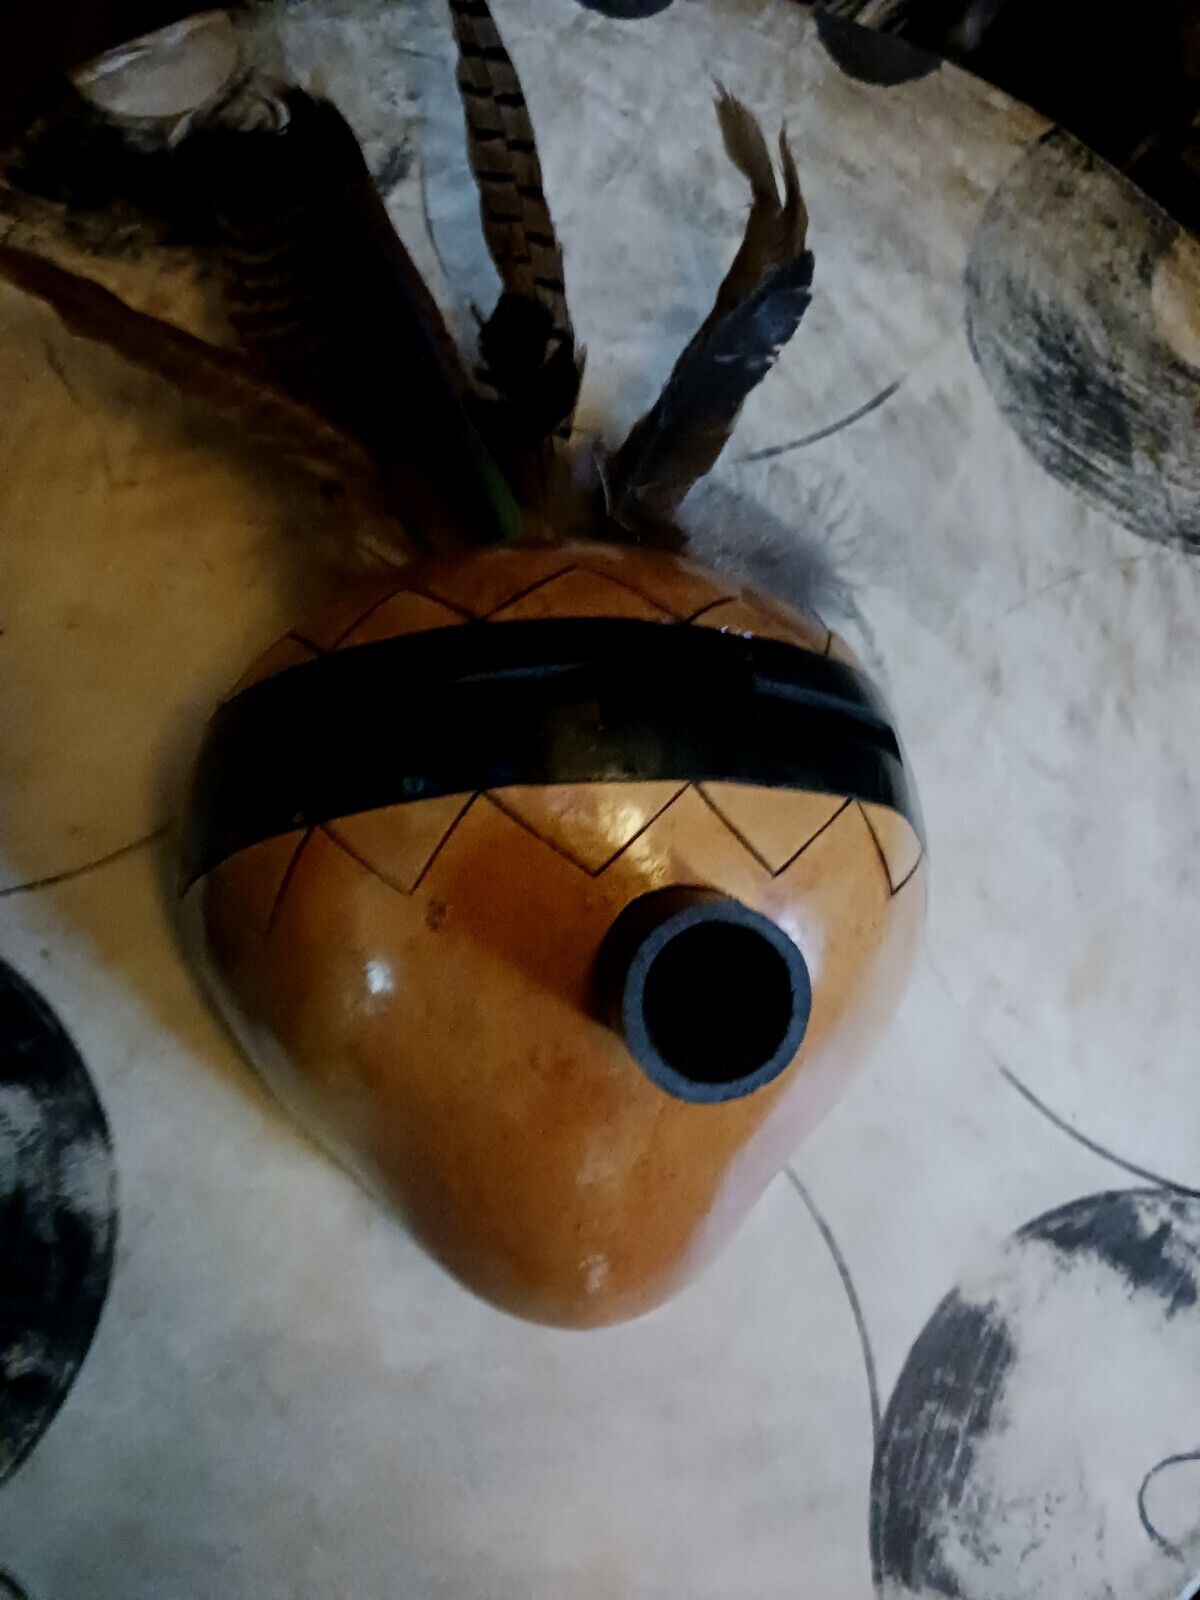 **AWESOME NATIVE AMERICAN  TRIBAL GOURD MASK ART LARGE  VERY COOL*